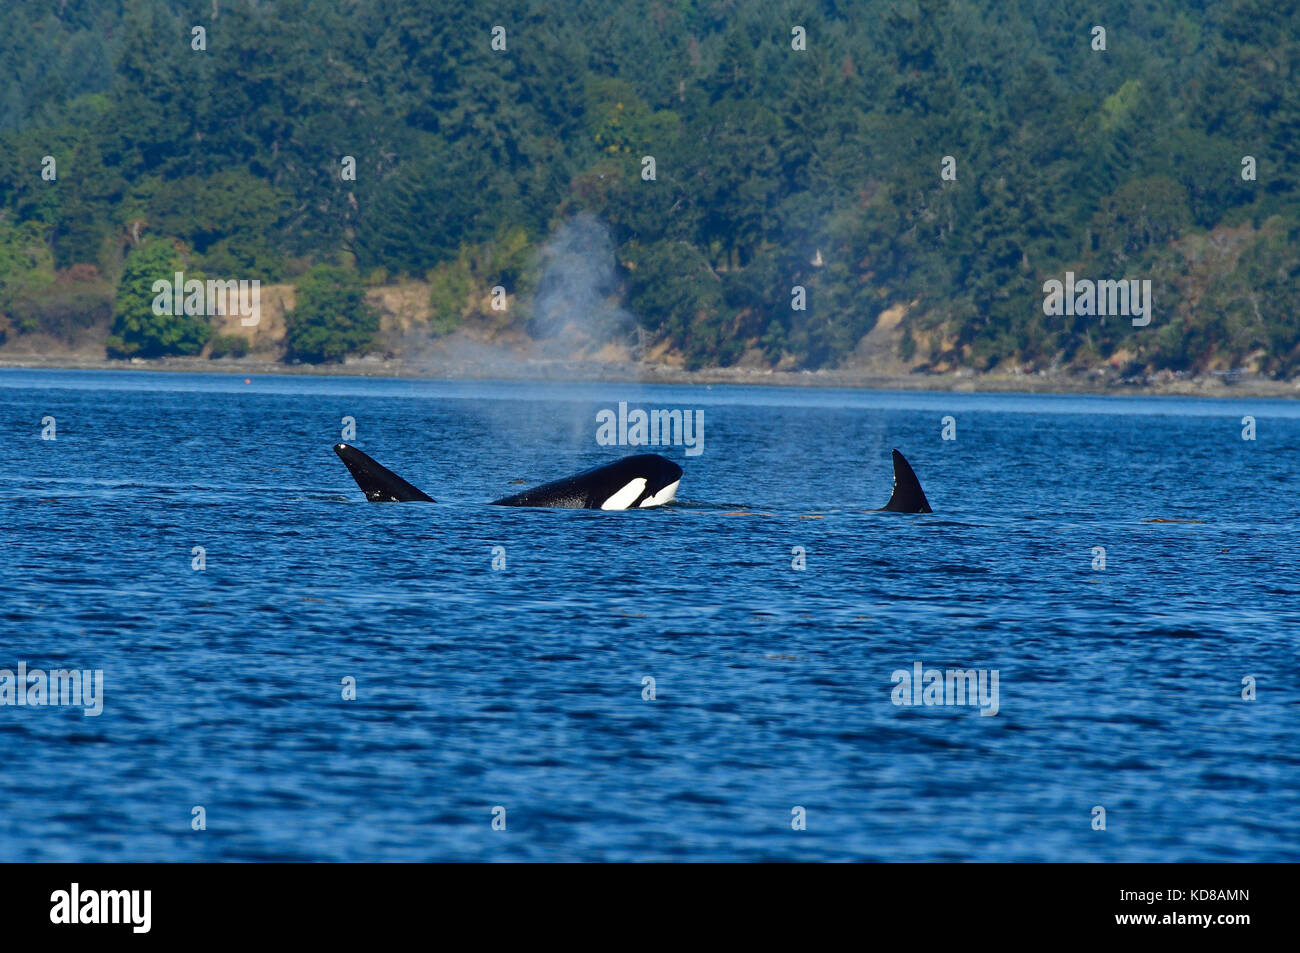 A pod of orcas (Orcinus orca) swimming in the coastal water near Vancouver Island B.C. Stock Photo